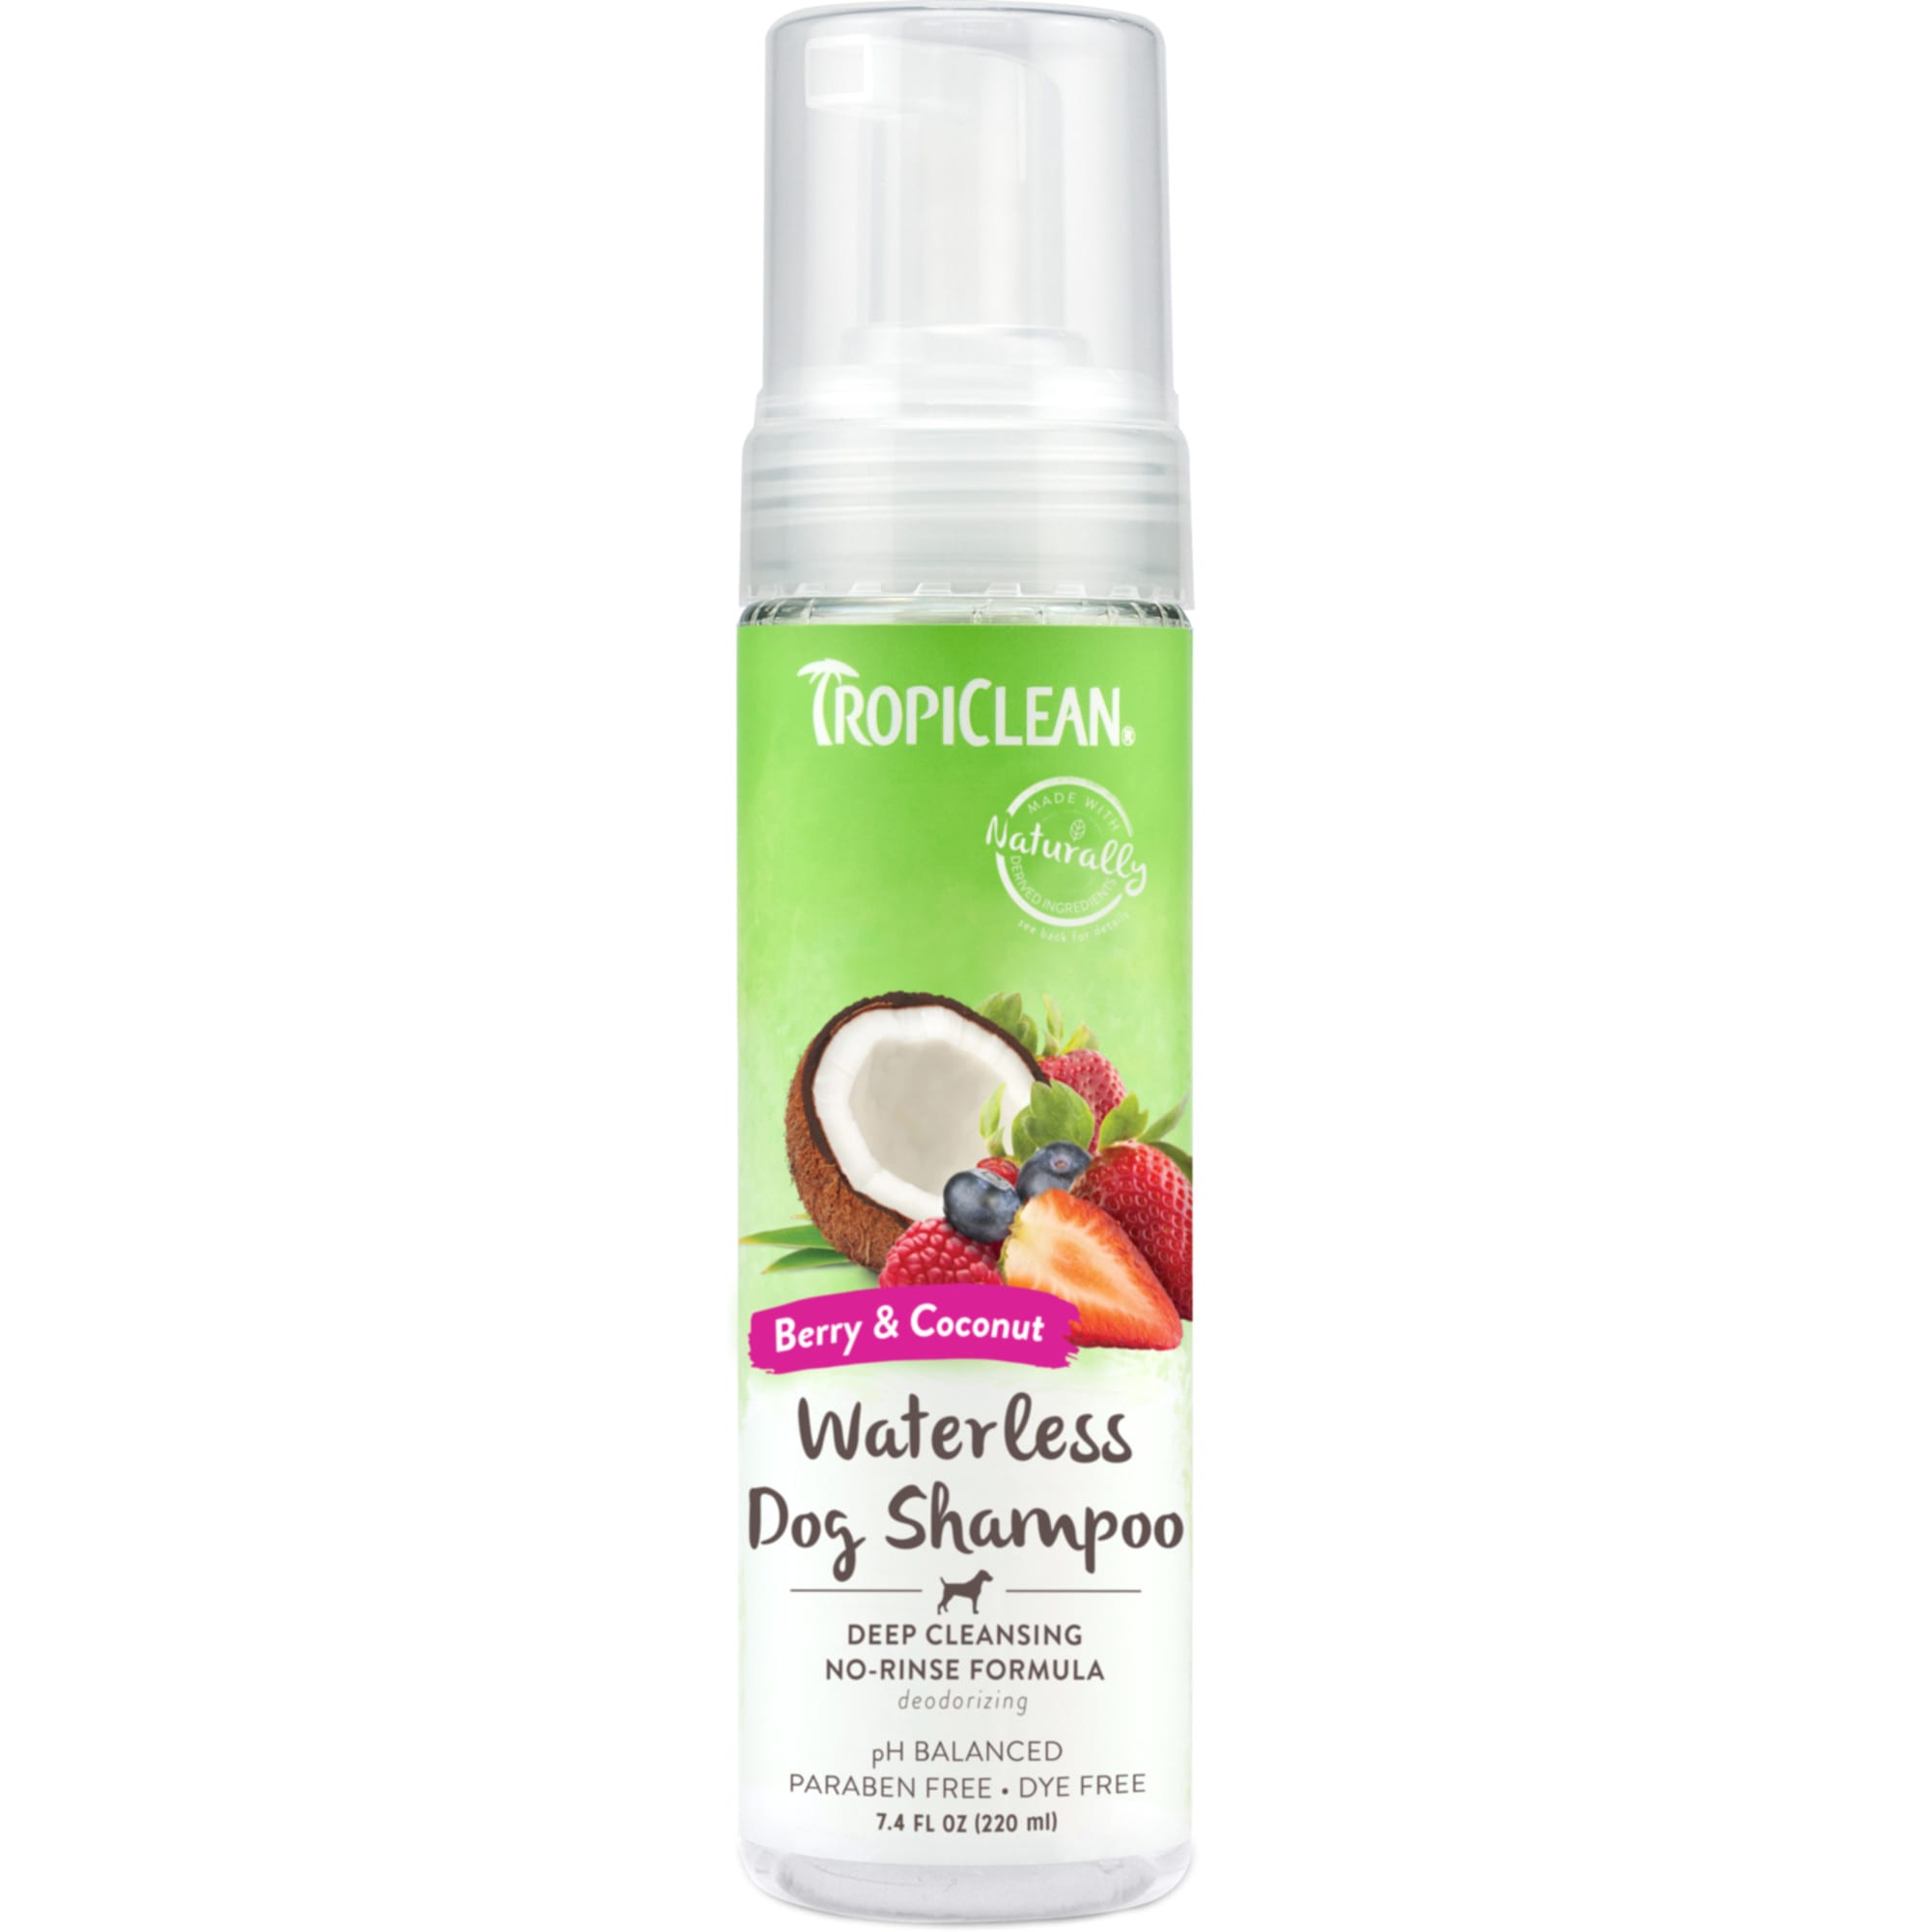 TropiClean Coconut Deep Cleansing Waterless for Dogs, 7.4 fl. oz. | Petco